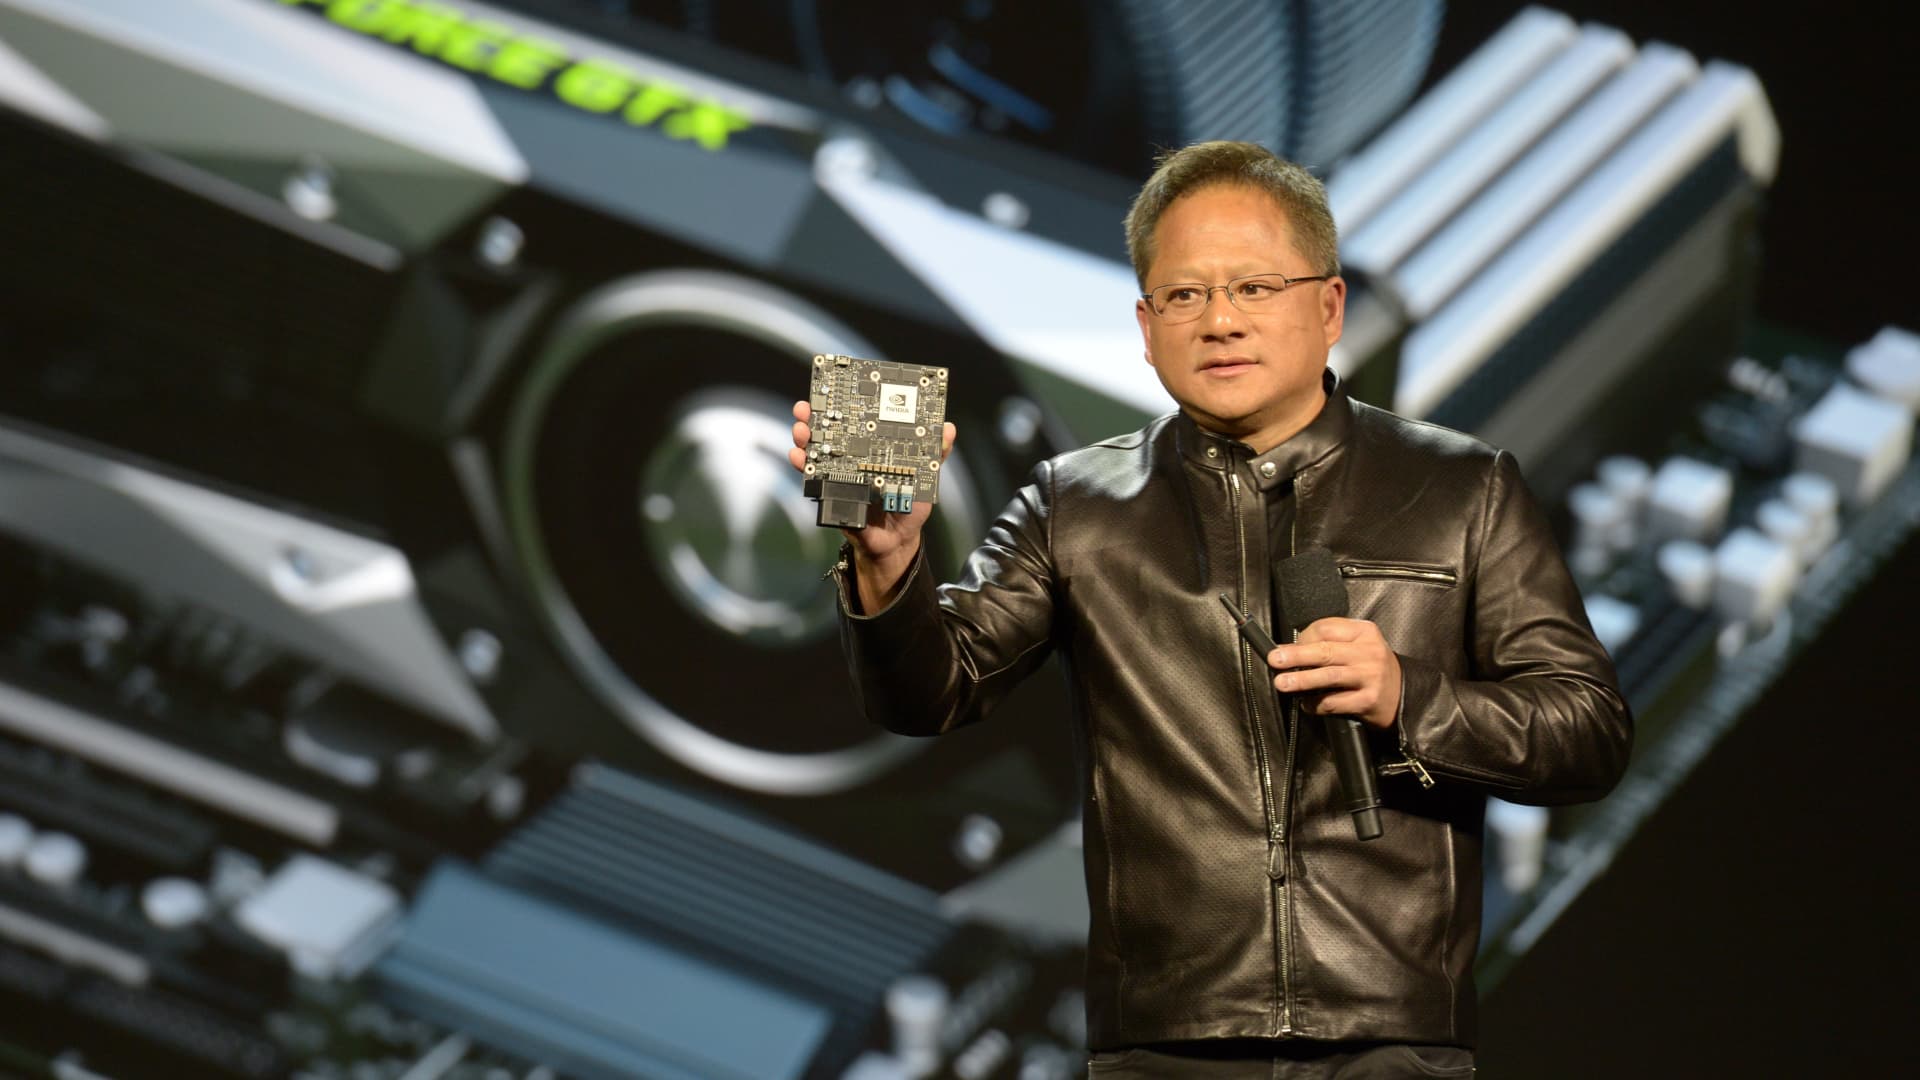 Nvidia's blowout earnings report shows chipmaker is gobbling up all the profit in AI